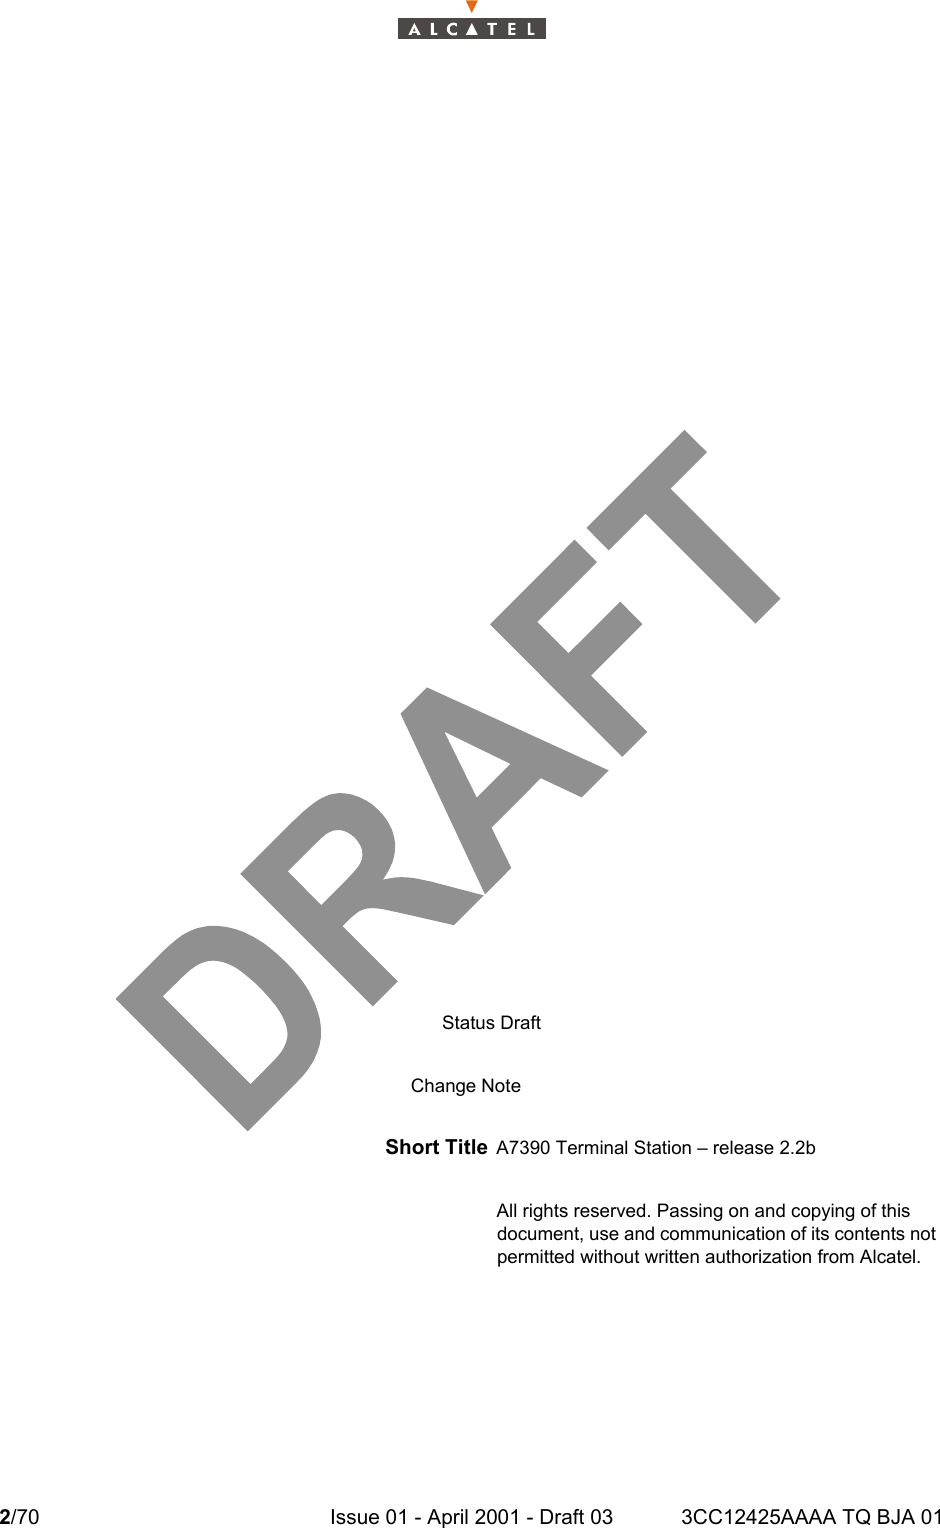 2/70 Issue 01 - April 2001 - Draft 03 3CC12425AAAA TQ BJA 014Status DraftChange NoteShort Title A7390 Terminal Station – release 2.2bAll rights reserved. Passing on and copying of thisdocument, use and communication of its contents notpermitted without written authorization from Alcatel.